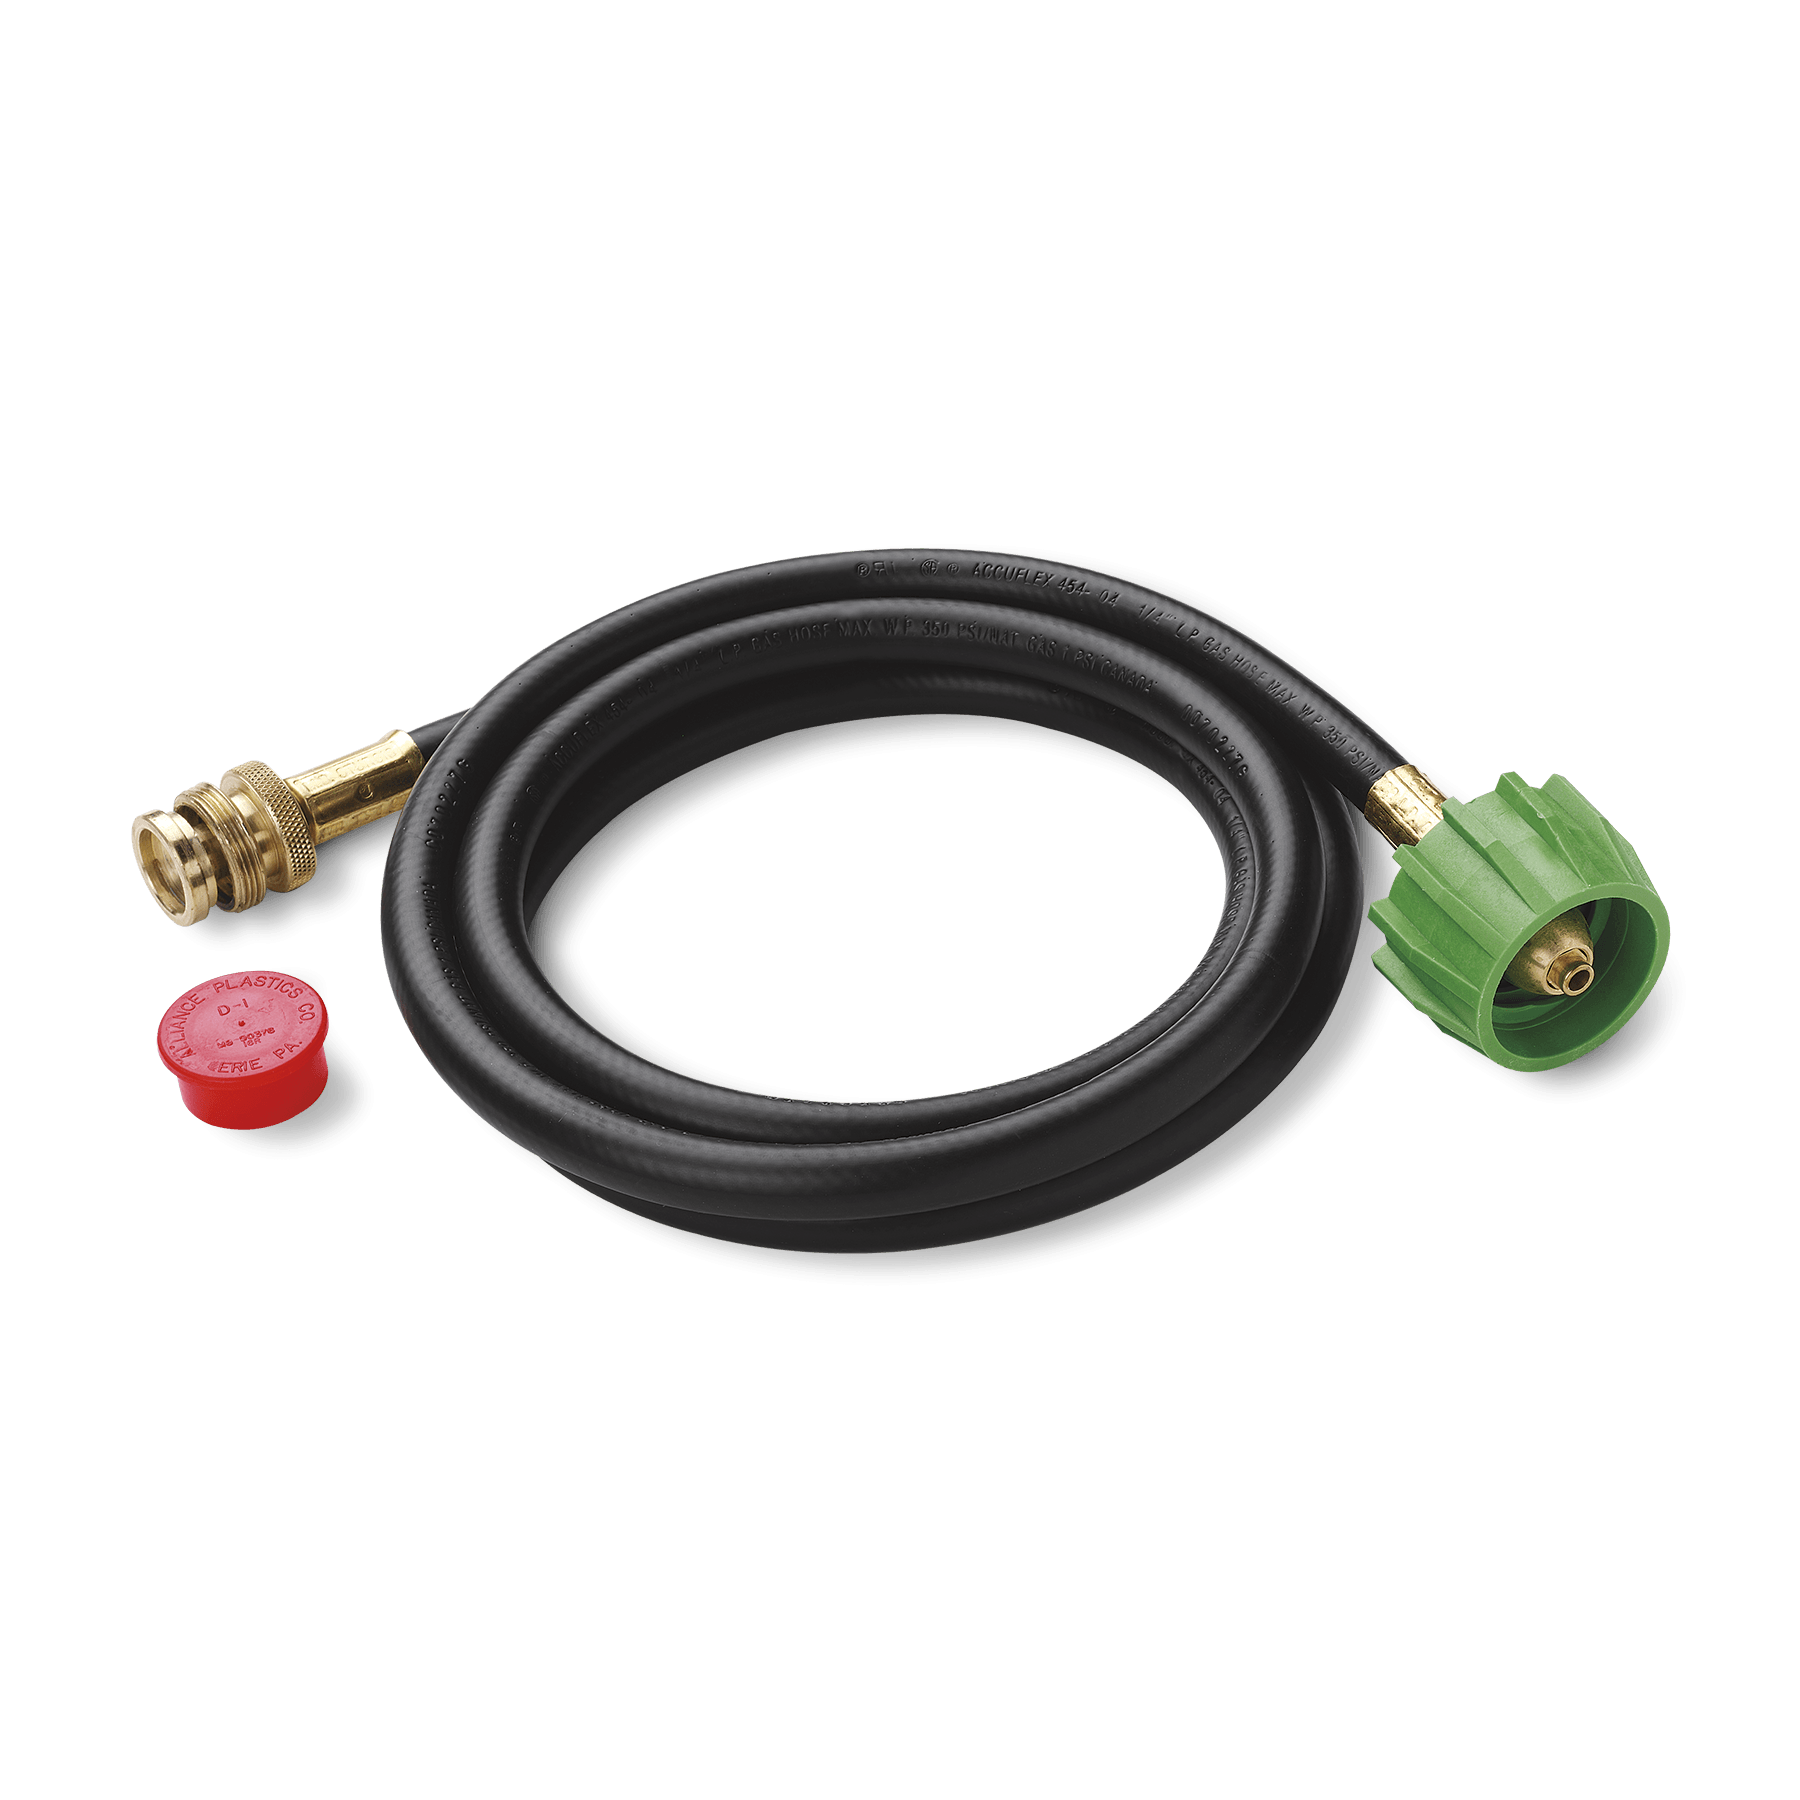 QUICK CONNECT LPG COUPLING DISCONNECT  THE HOSE FROM WEBER Q BBQs  HEATER